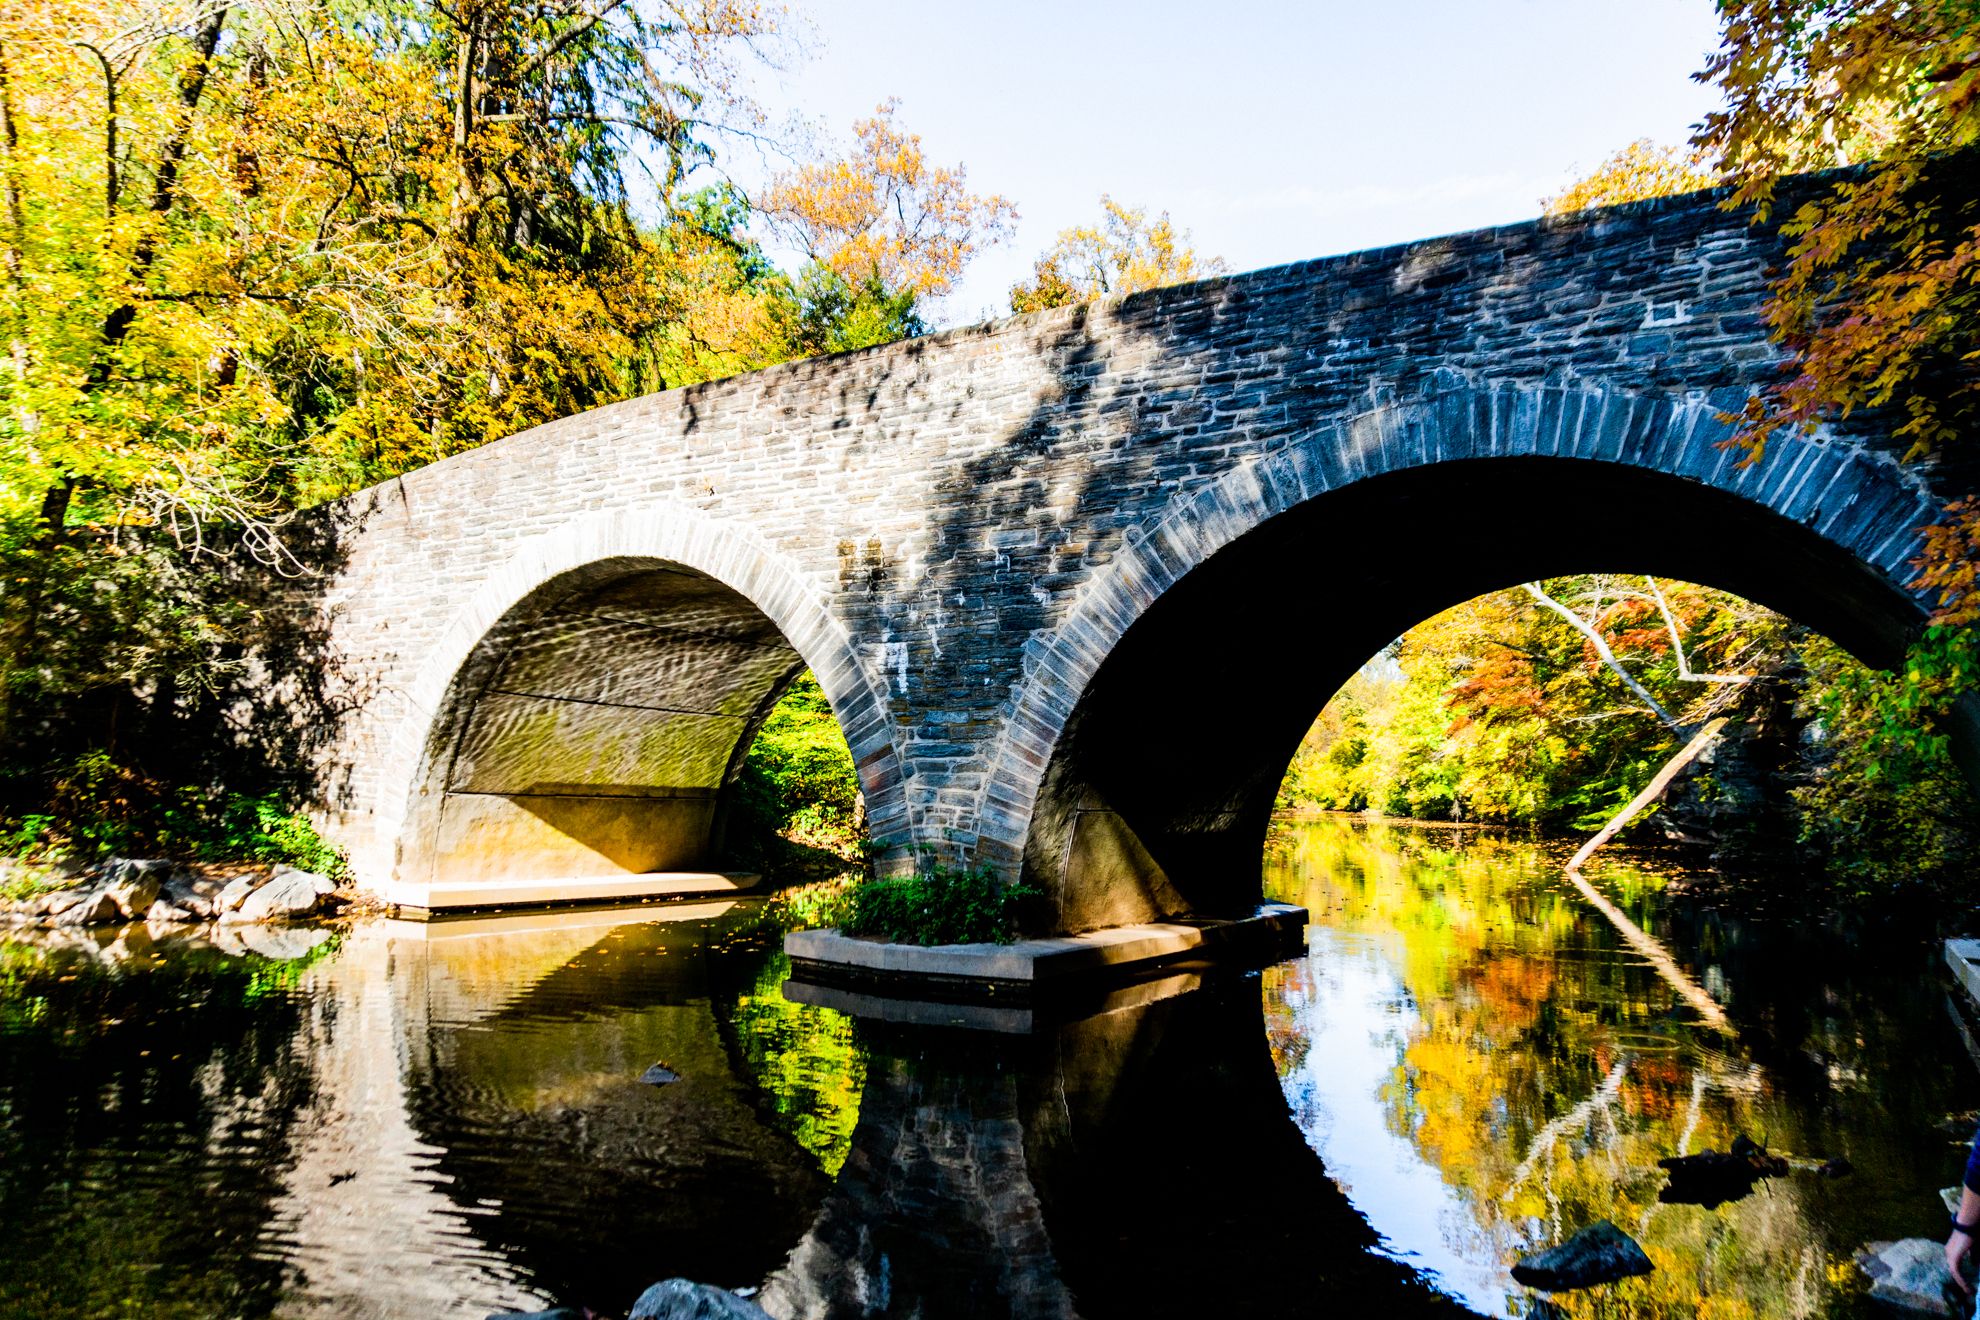 A view of an aqueduct footbridge as seen from the banks of the Wissahickon Creek.